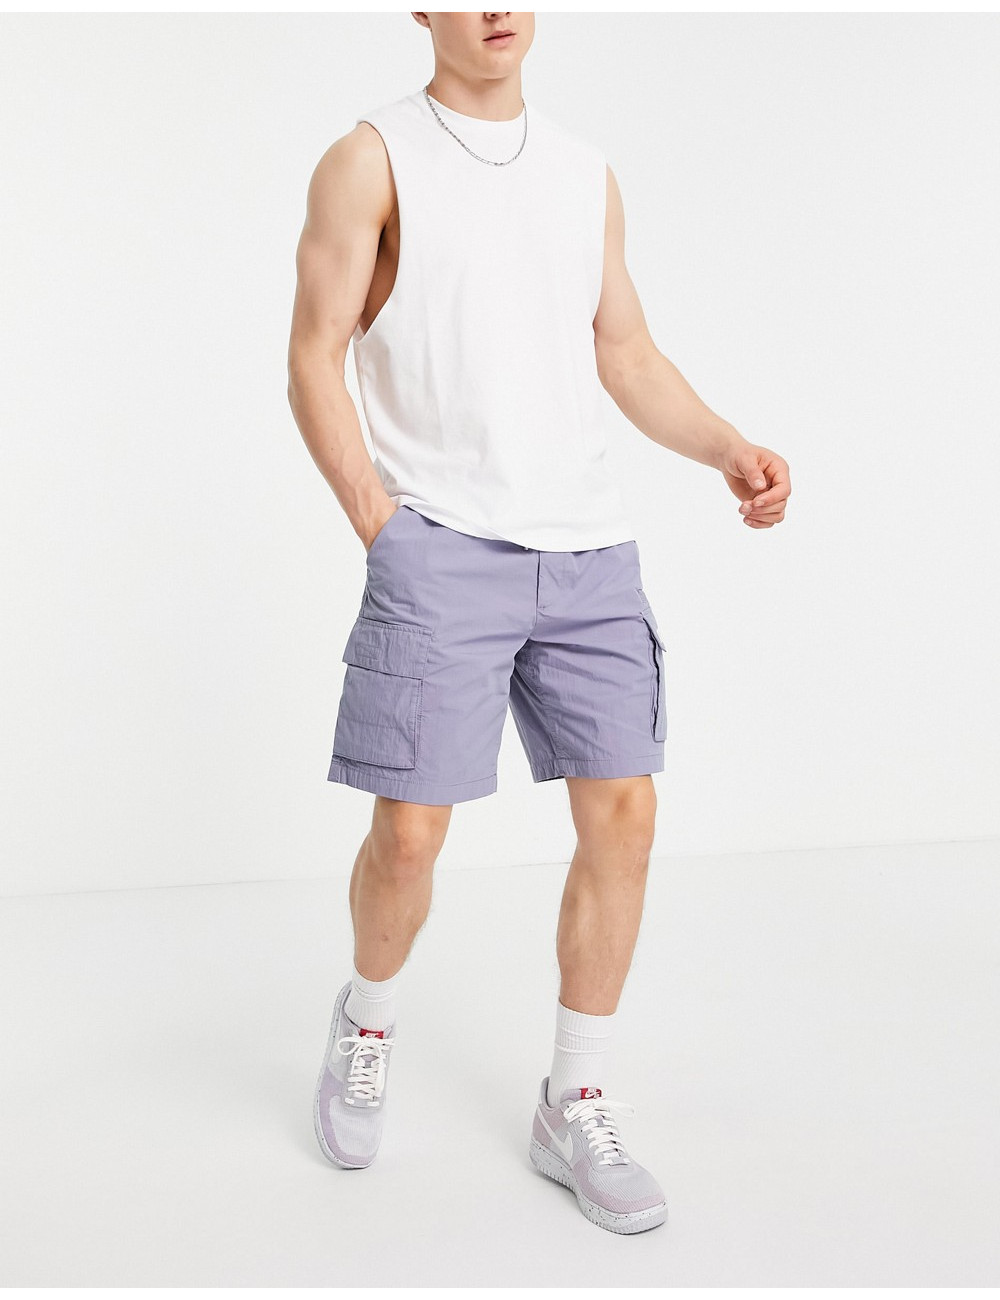 River Island pull on shorts...